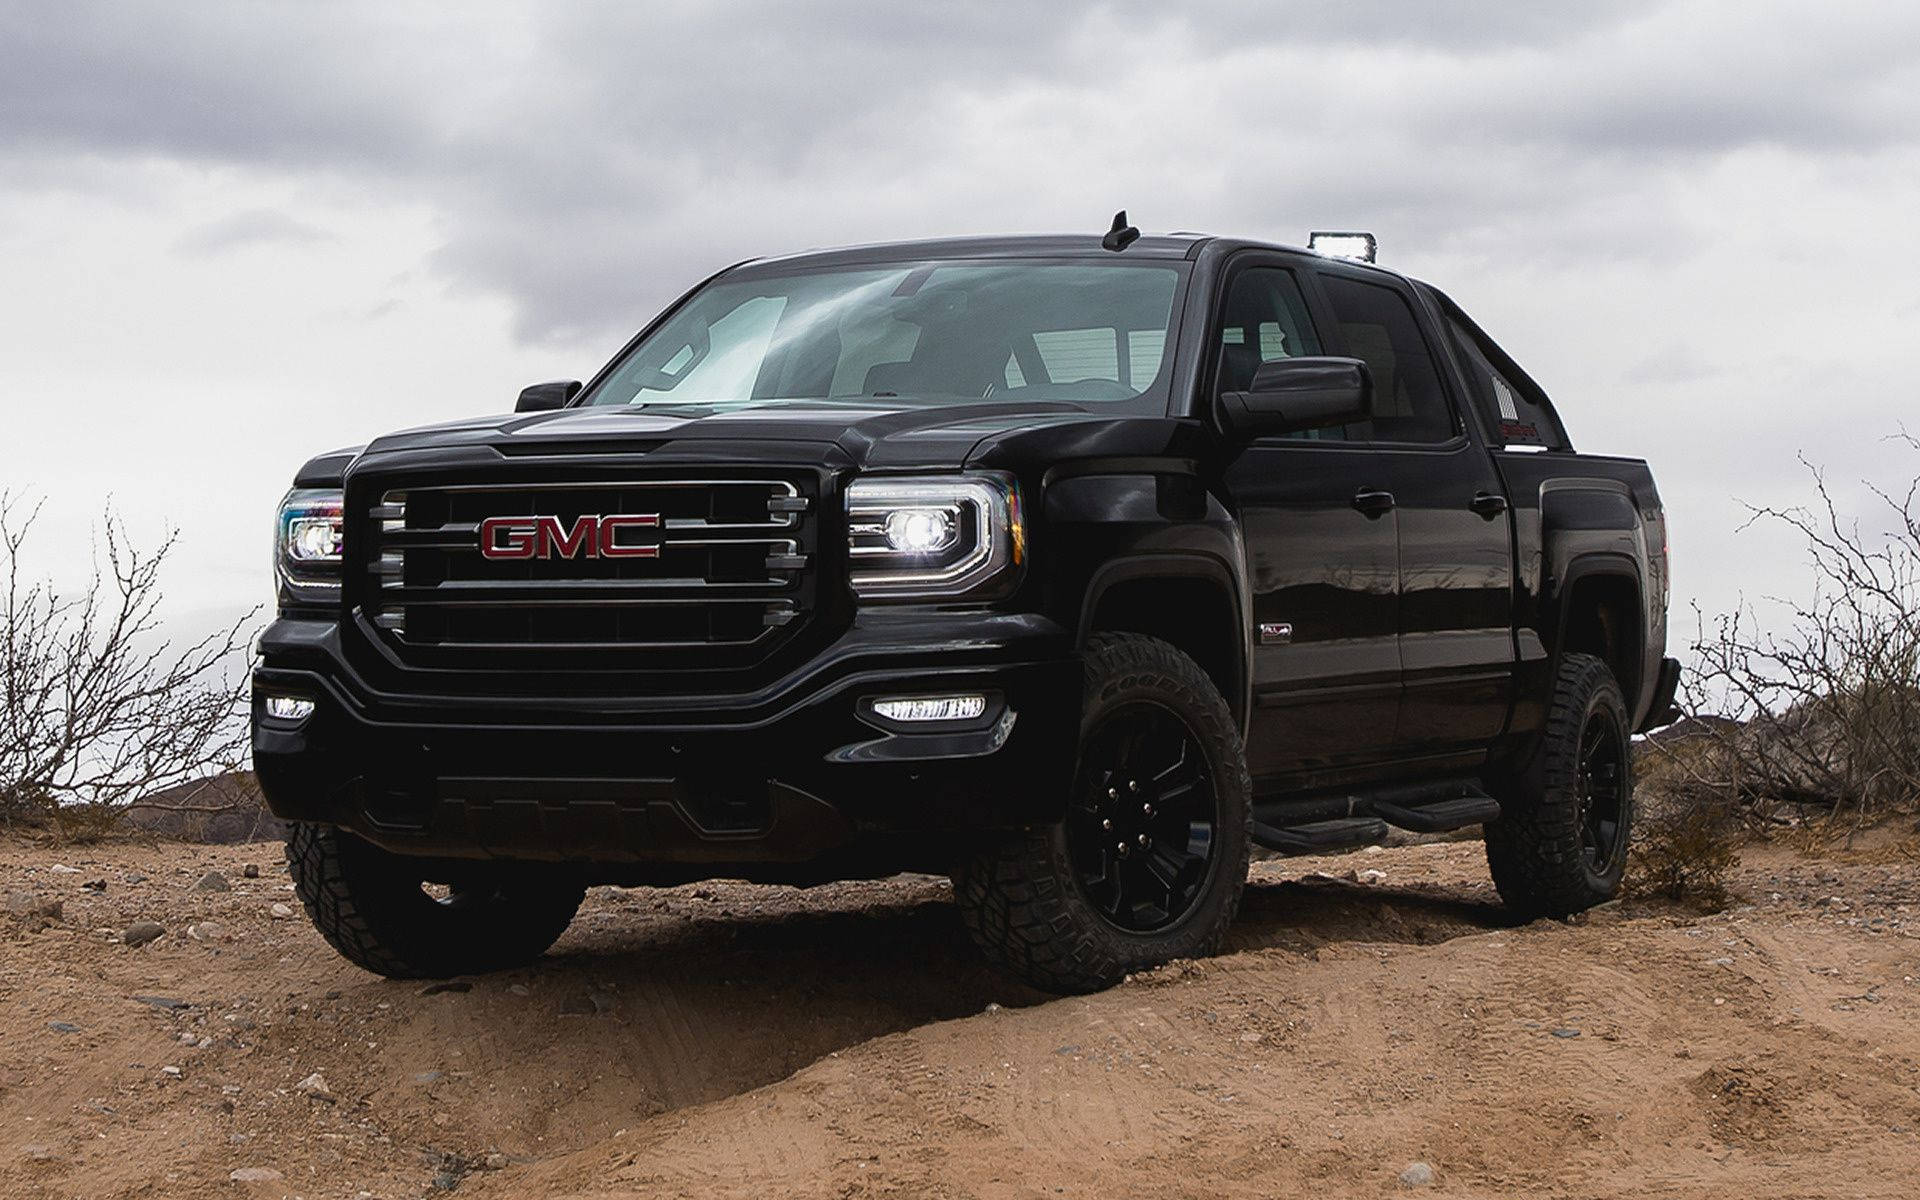 Gmc Sierra In All Black Color Background